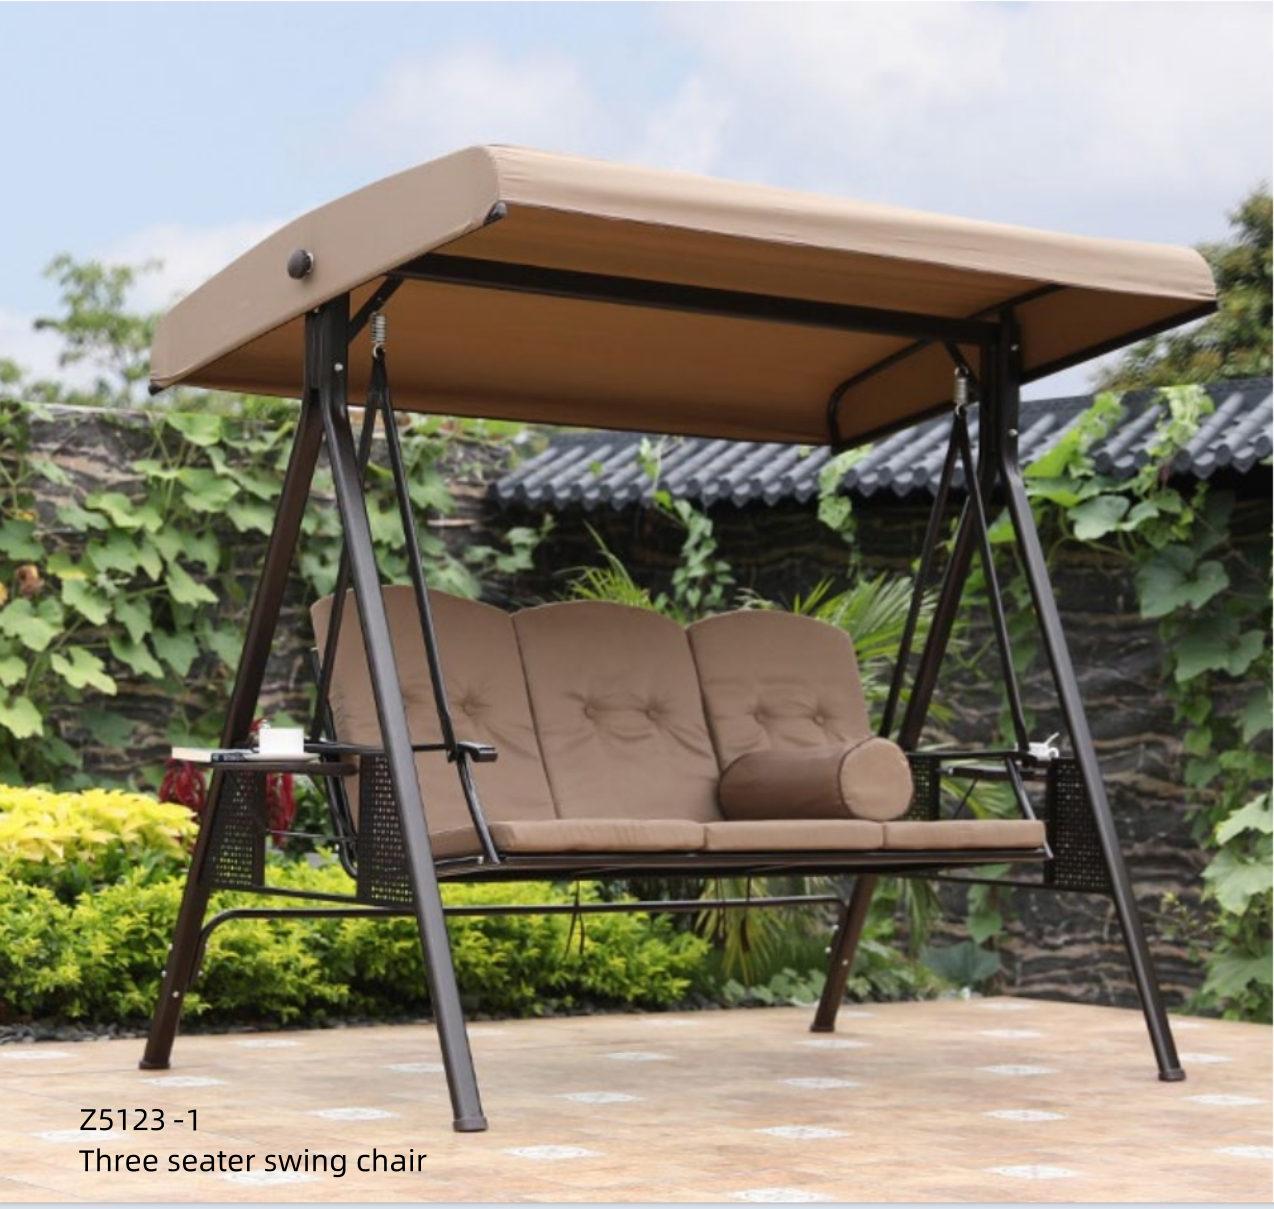 Customized outdoor furniture, courtyard hanging chairs, swings, luxury outdoor garden swings with sunshade, recliner chairs, swing chairs